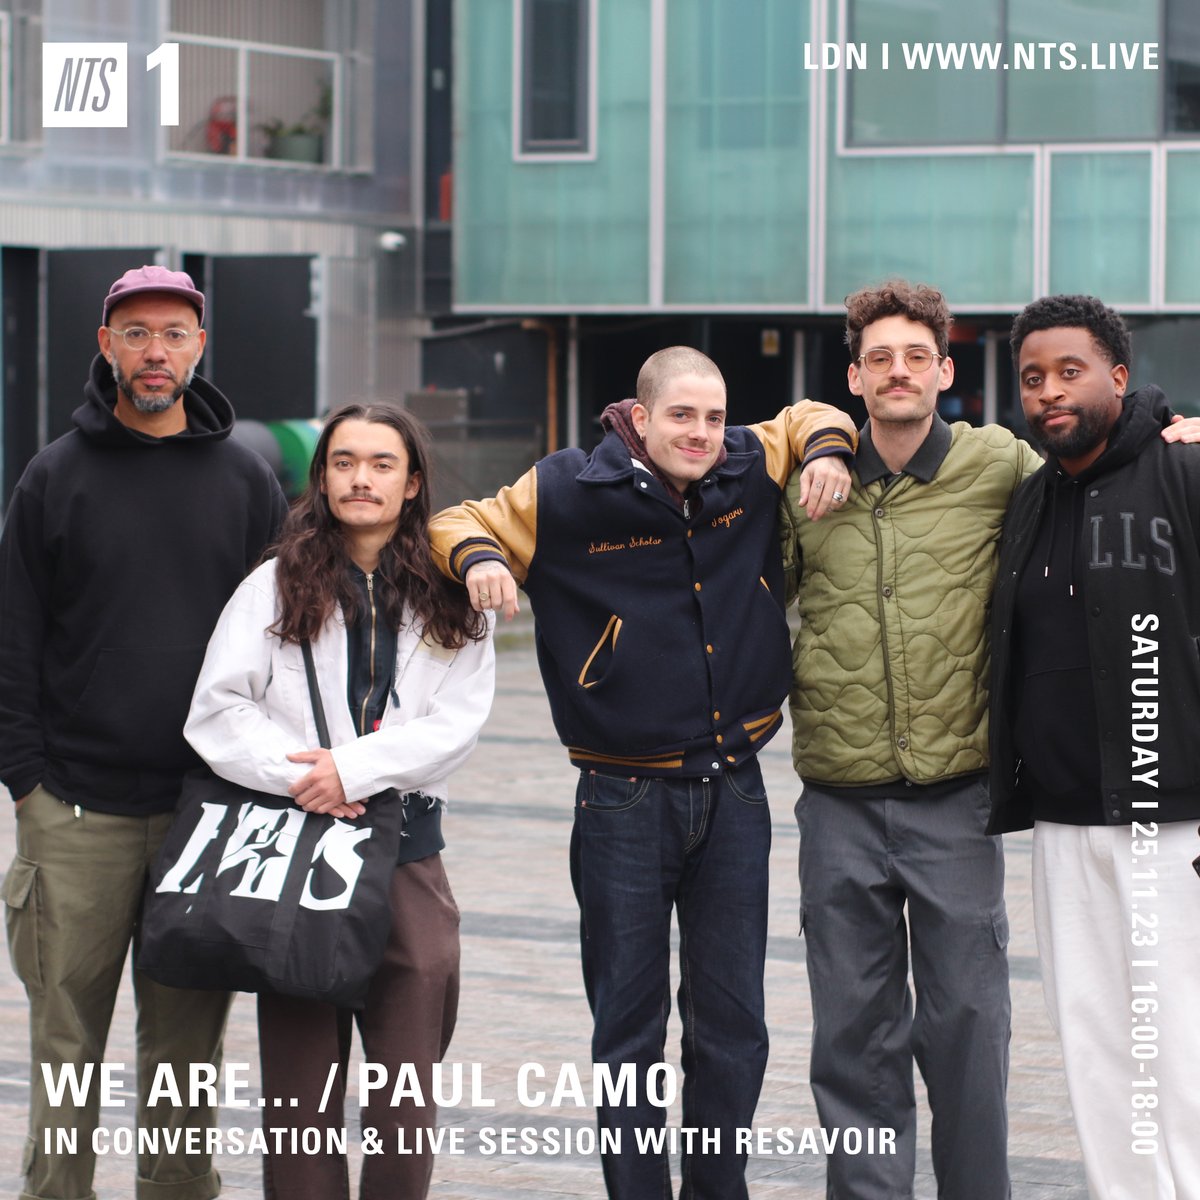 Chicago-born and based musician, composer and producer Will Miller aka @resavoirrr chats to @PaulCamo on the show this month, complete with a live session Tune in: nts.live/1